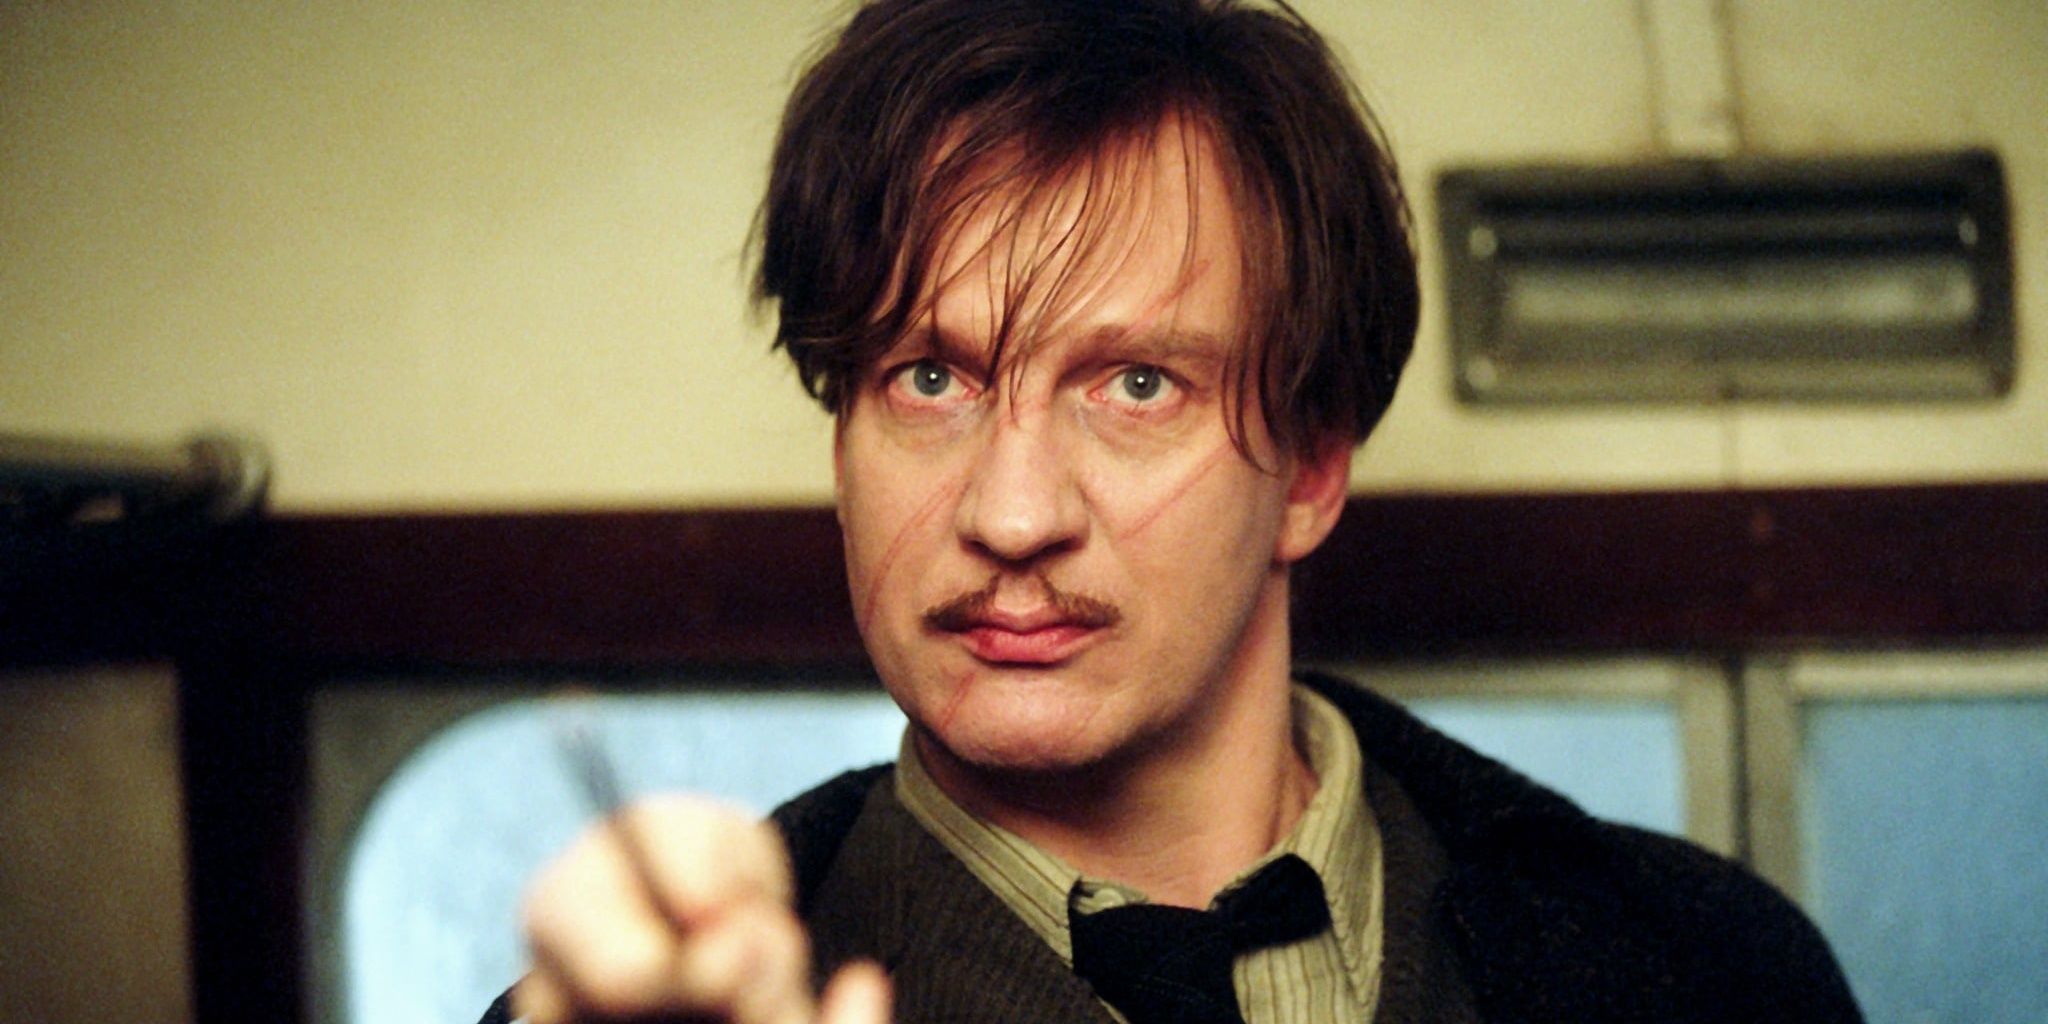 Remus Lupin points his wand at someone in Harry Potter and the Prisoner of Azkaban